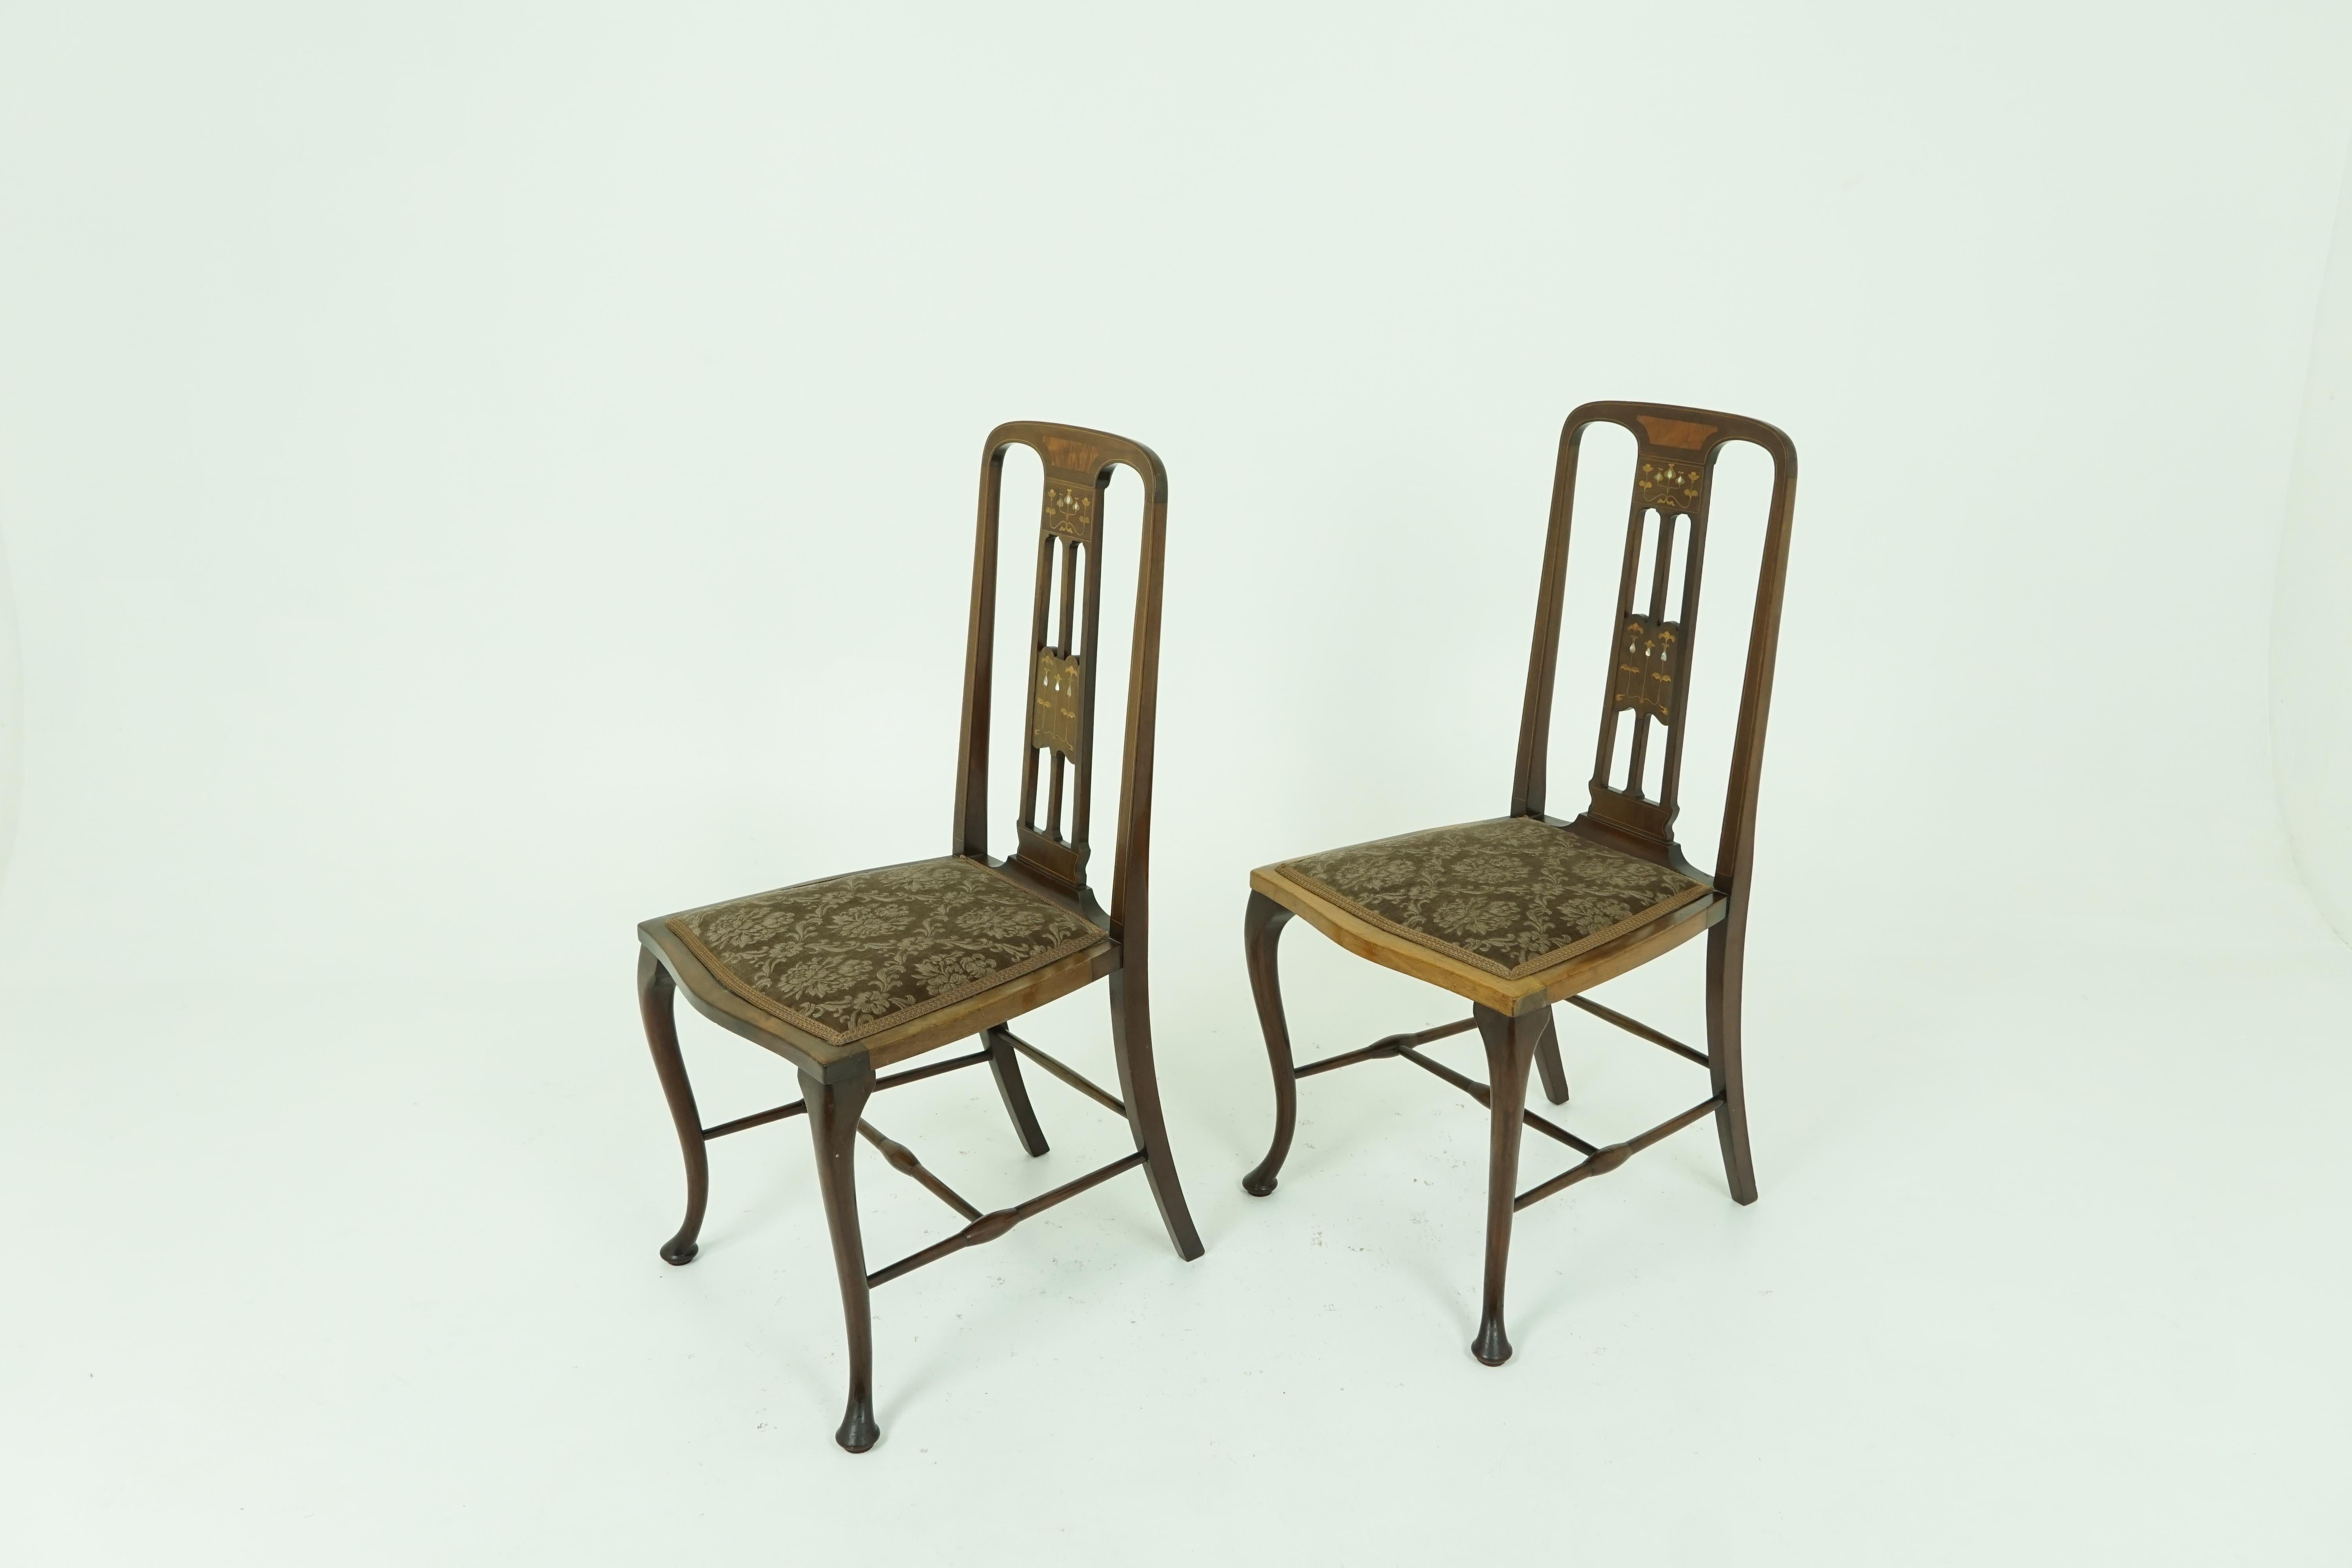 Antique walnut chairs, pair of Art Nouveau inlaid upholstered seats, antique furniture, Scotland 1910, B1887

Scotland, 1910
Solid walnut and veneers
Original finish
Finely inlaid back
Stylized inlaid flower heads with mother of pearl